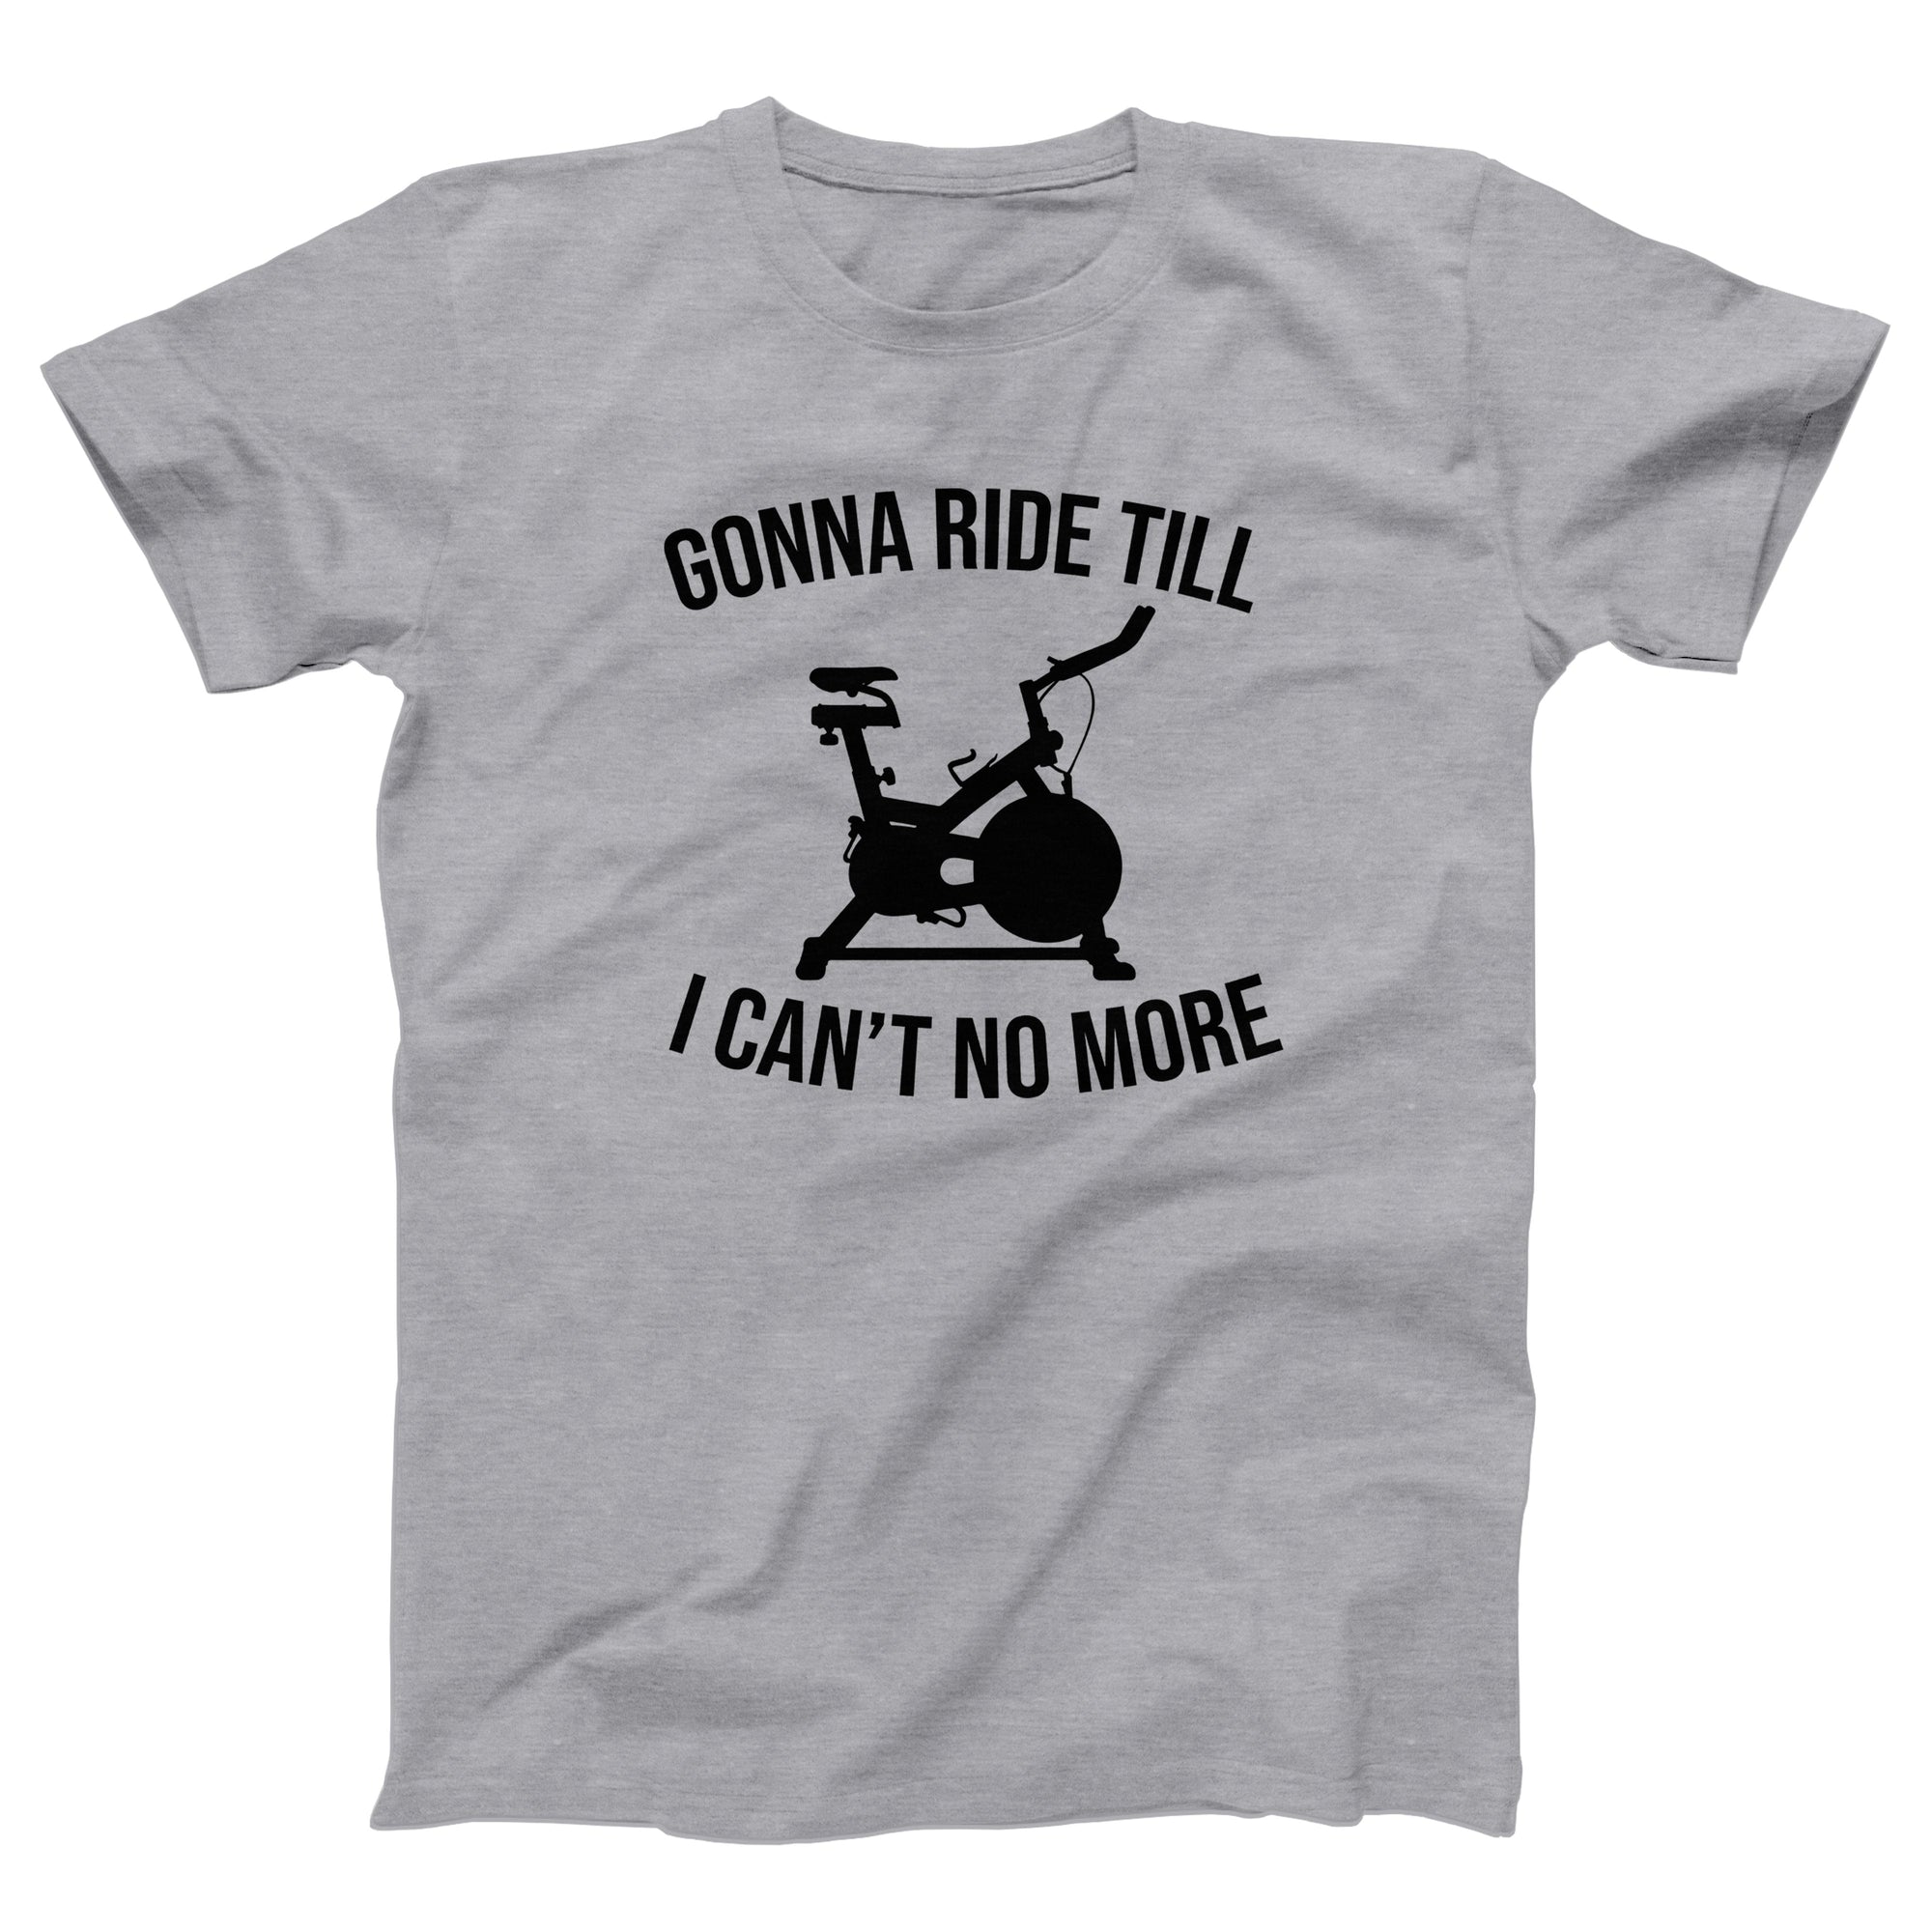 Ride Till I Can't No More Adult Unisex T-Shirt - anishphilip